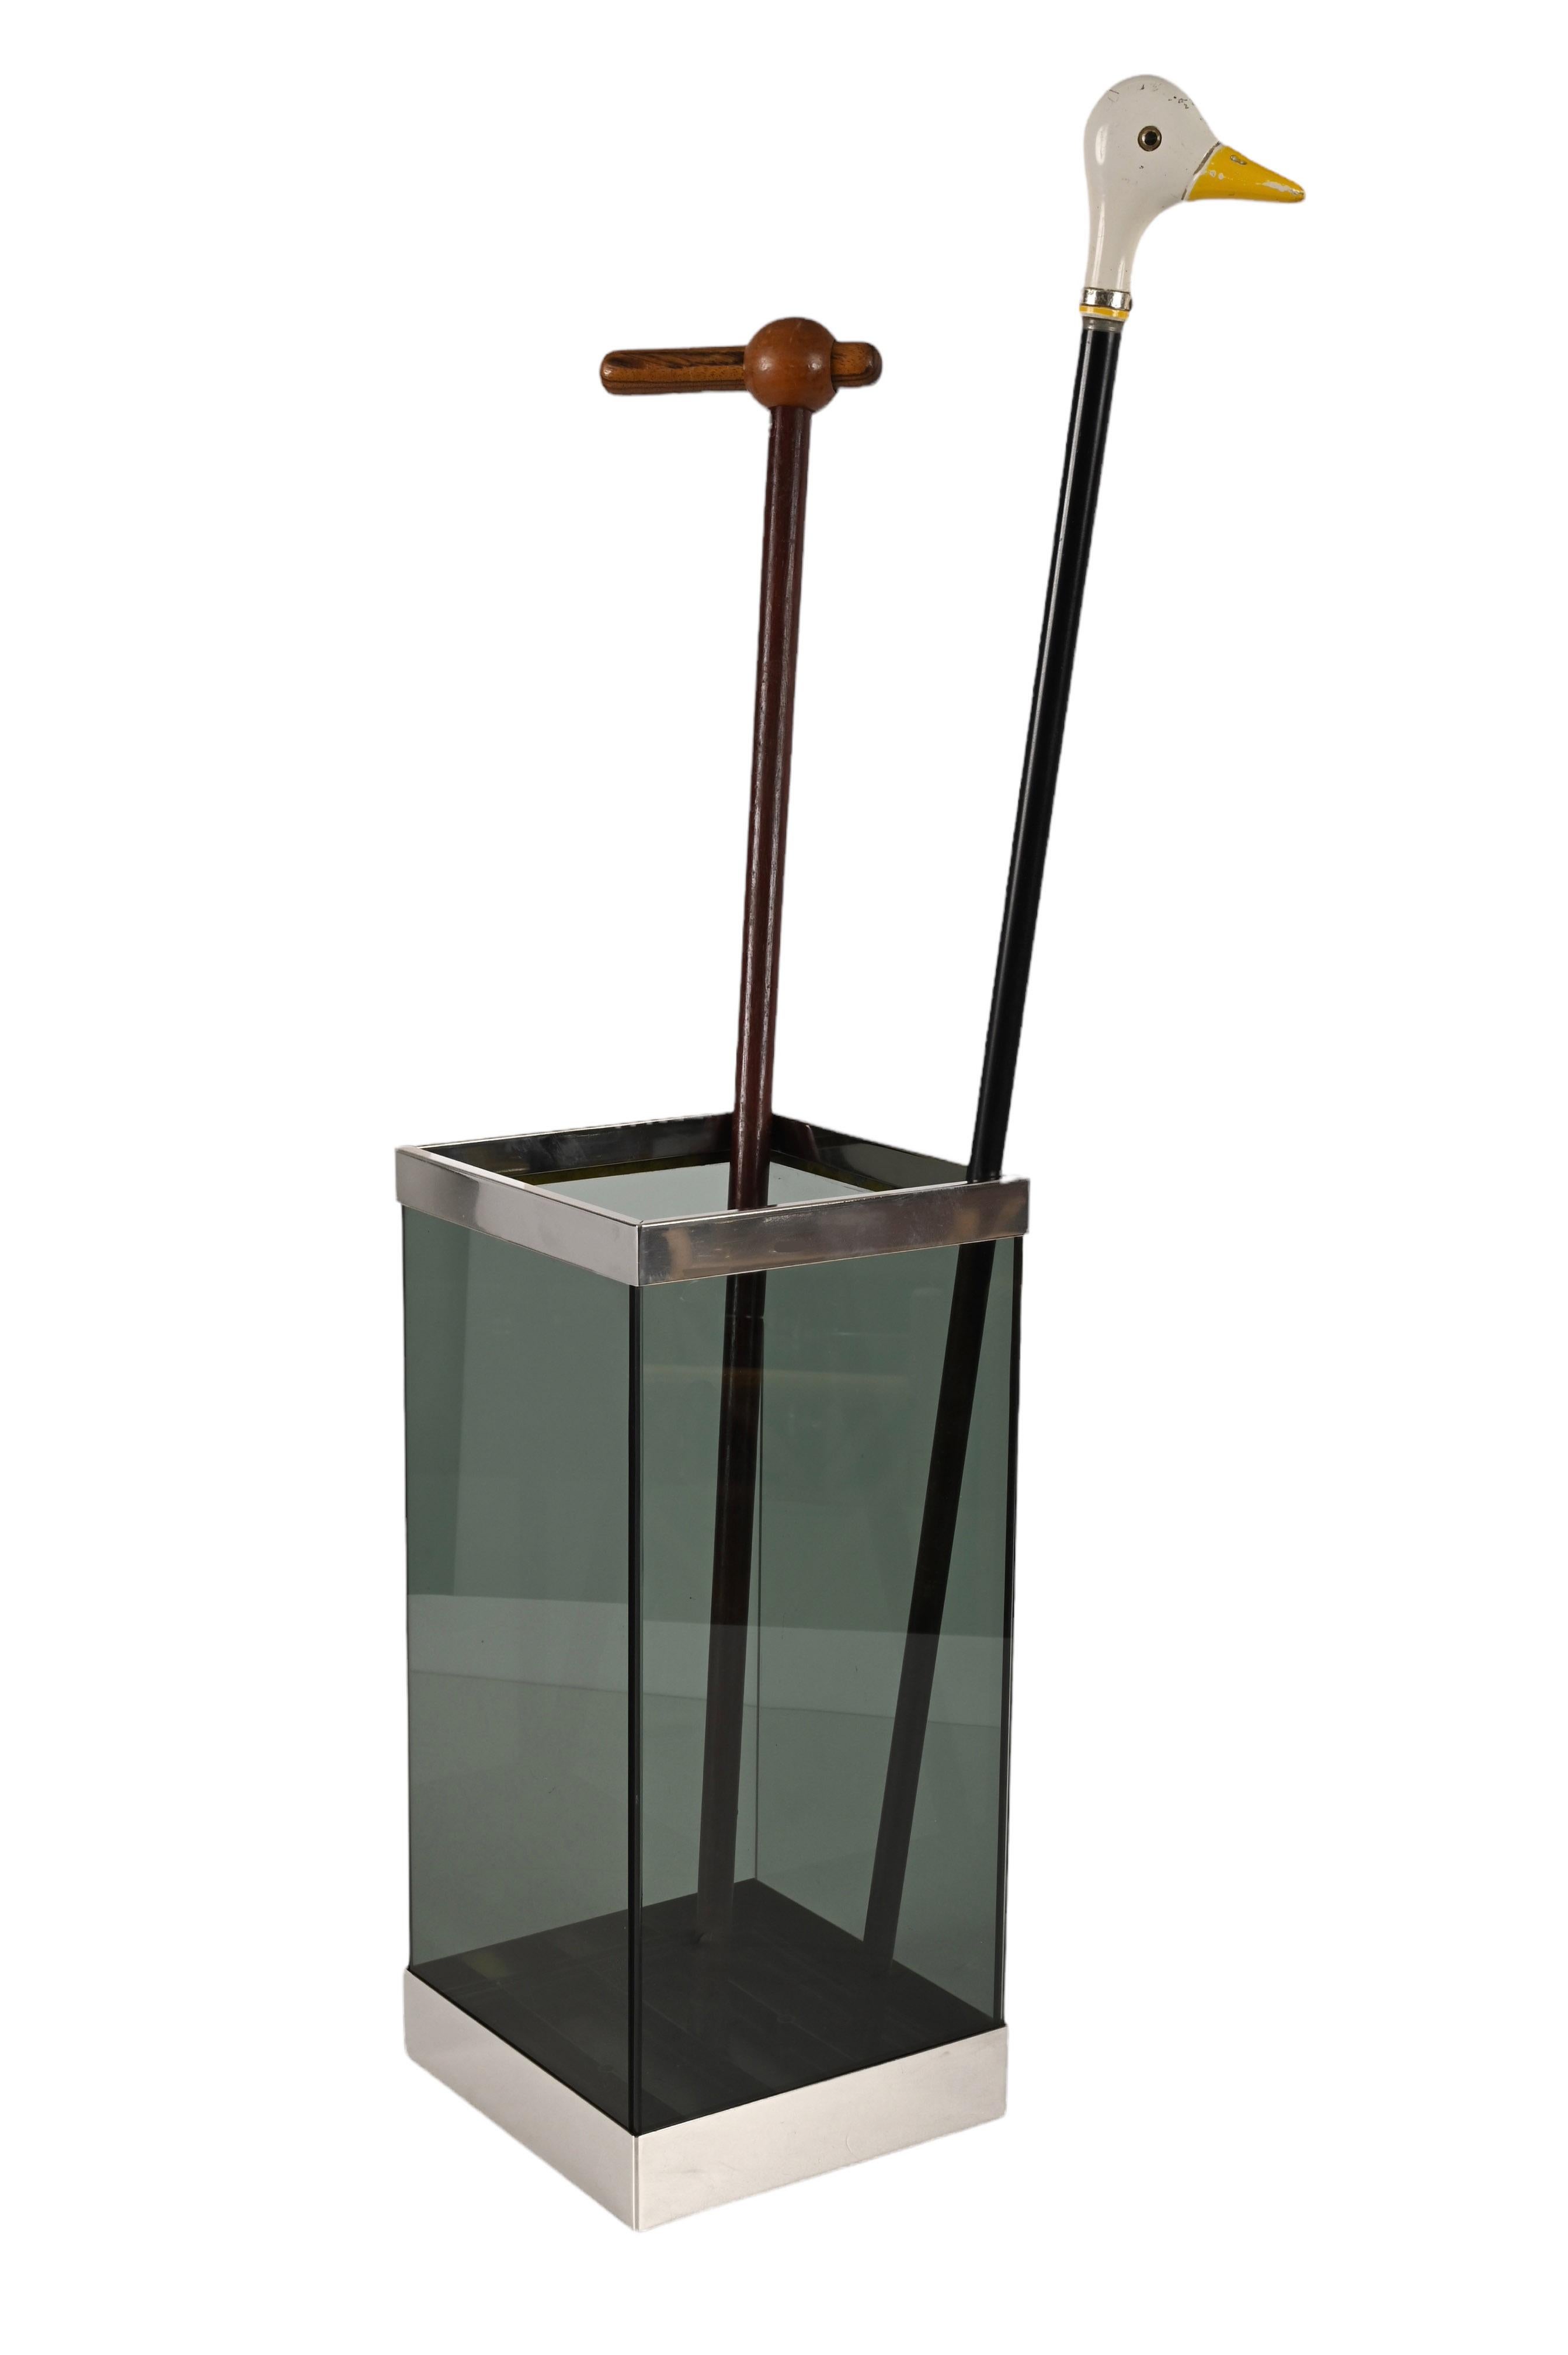 Midcentury Glass and Chrome Italian Umbrella Stand in Willy Rizzo Style, 1970s For Sale 7